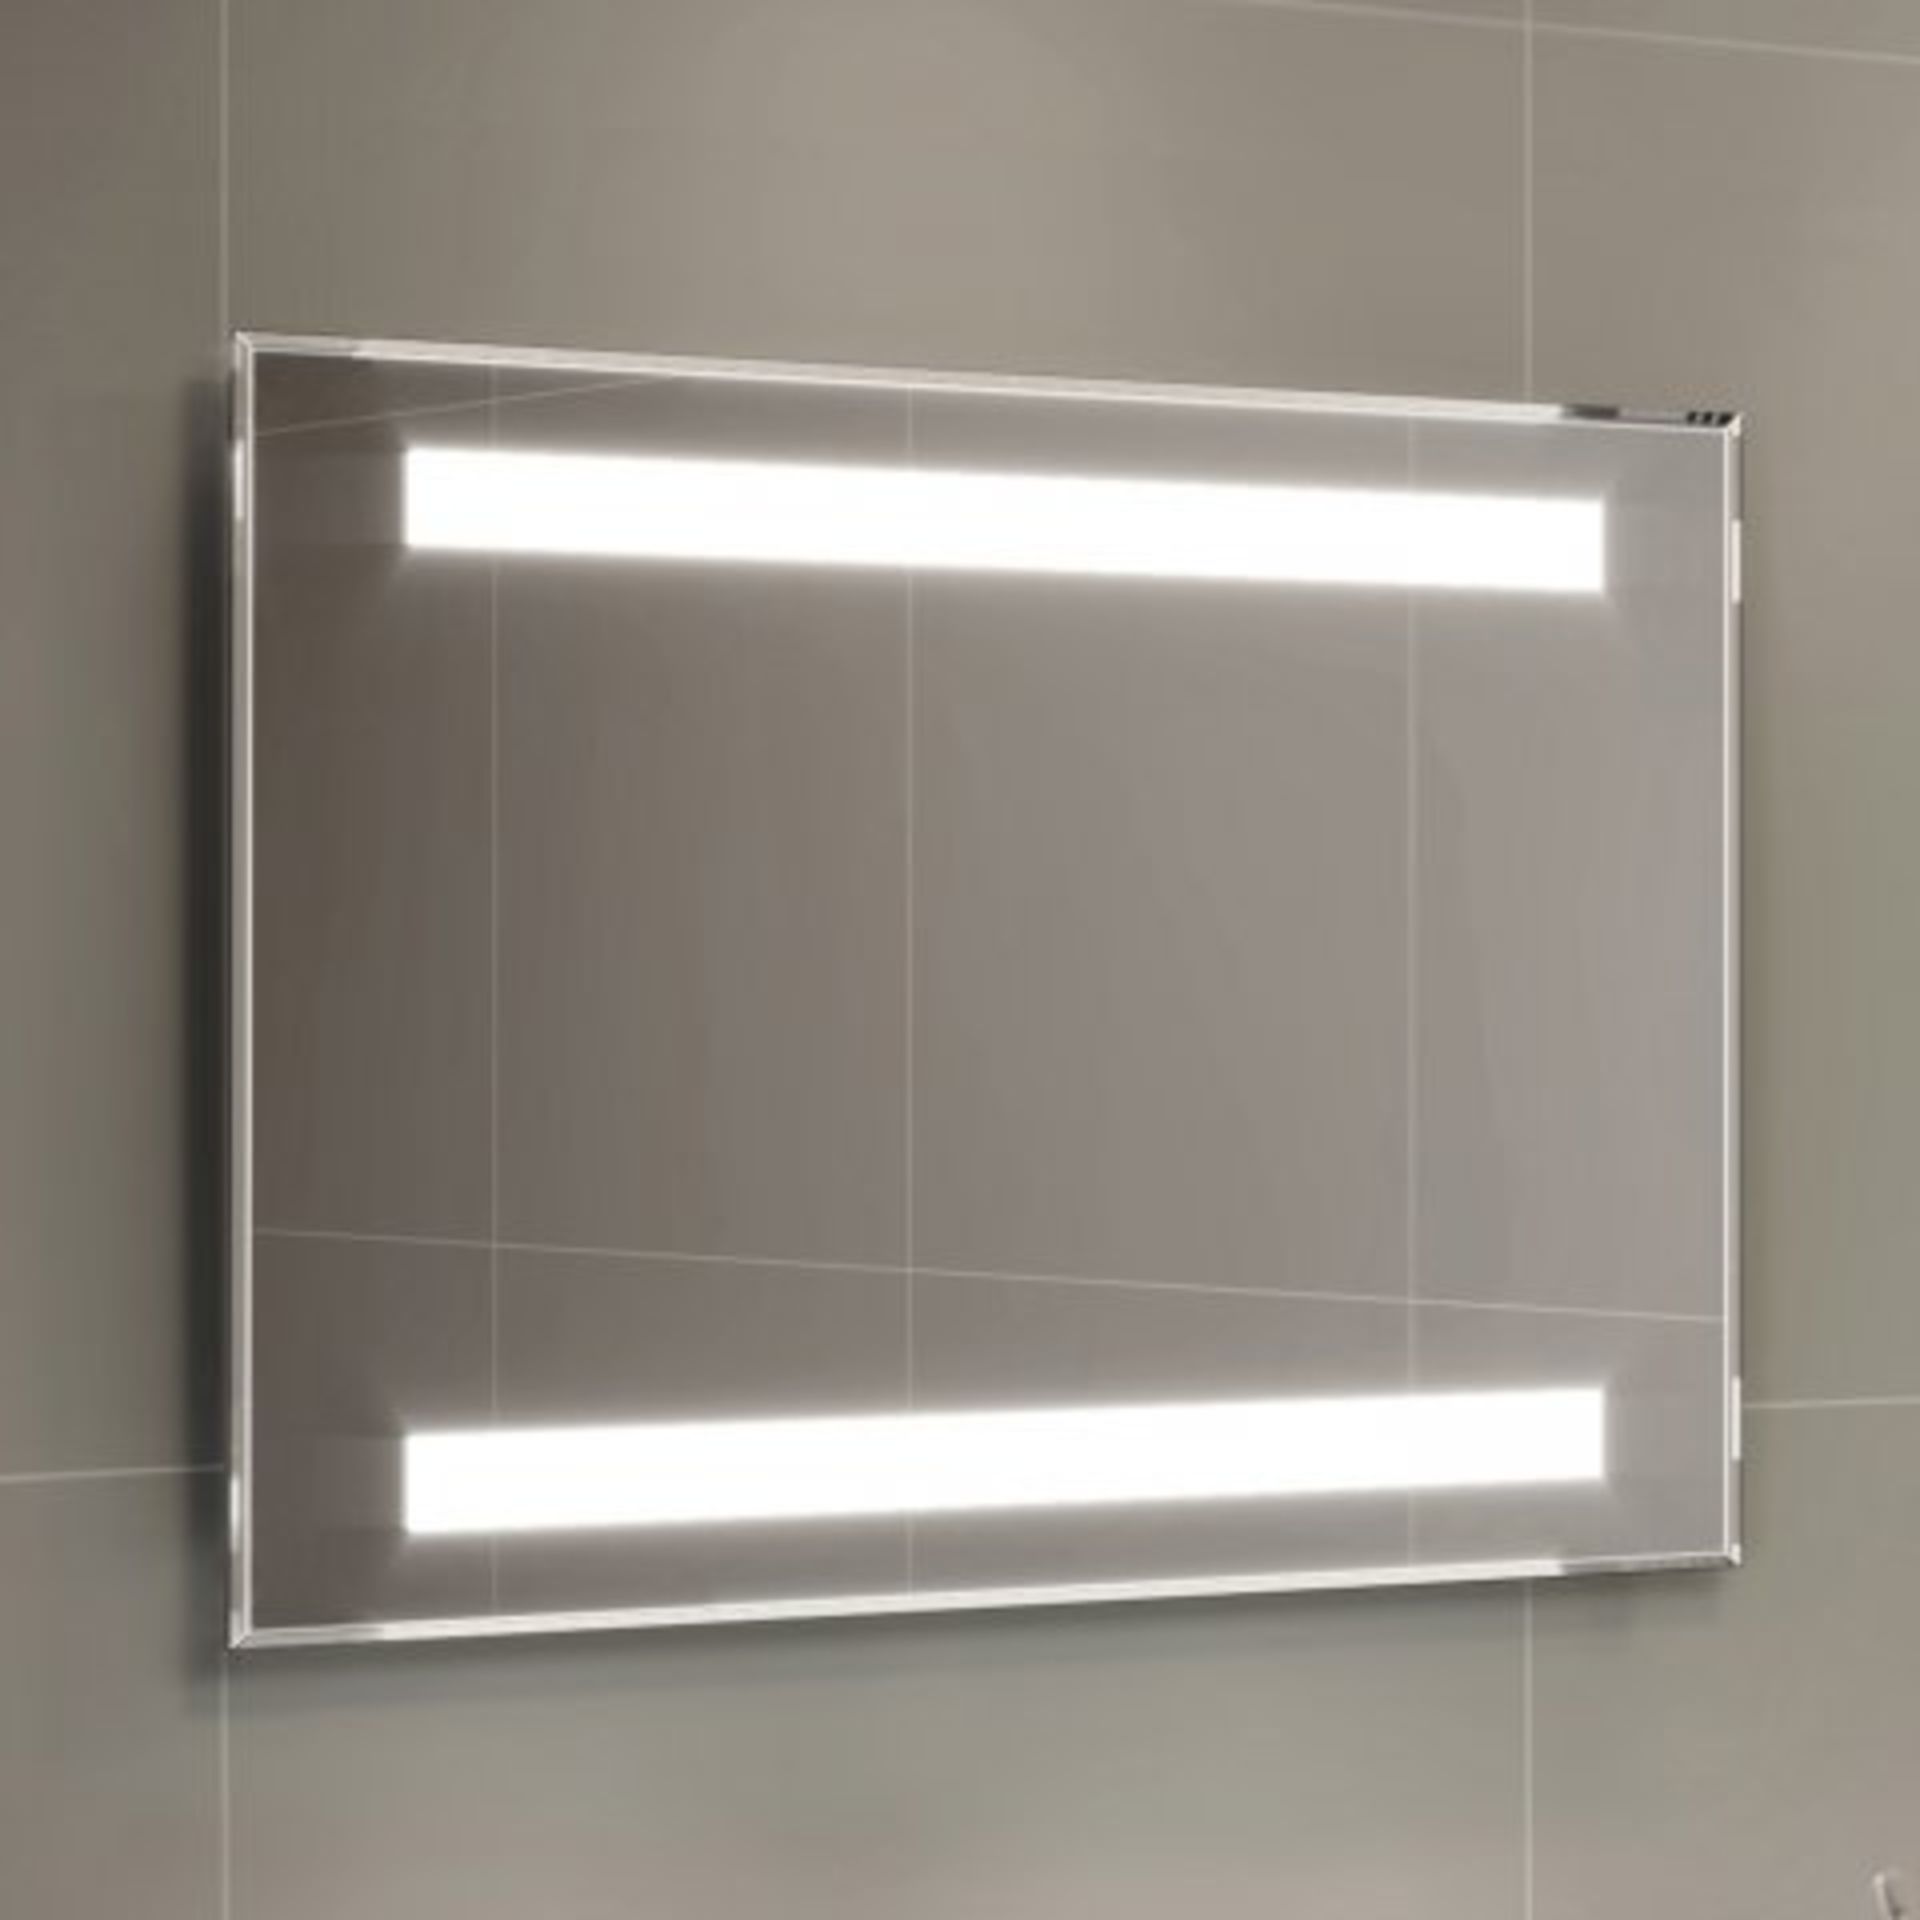 (A102) 500x700mm Omega Illuminated LED Mirror. RRP £349.99. Rectangular mirror with smart edges, - Image 2 of 5